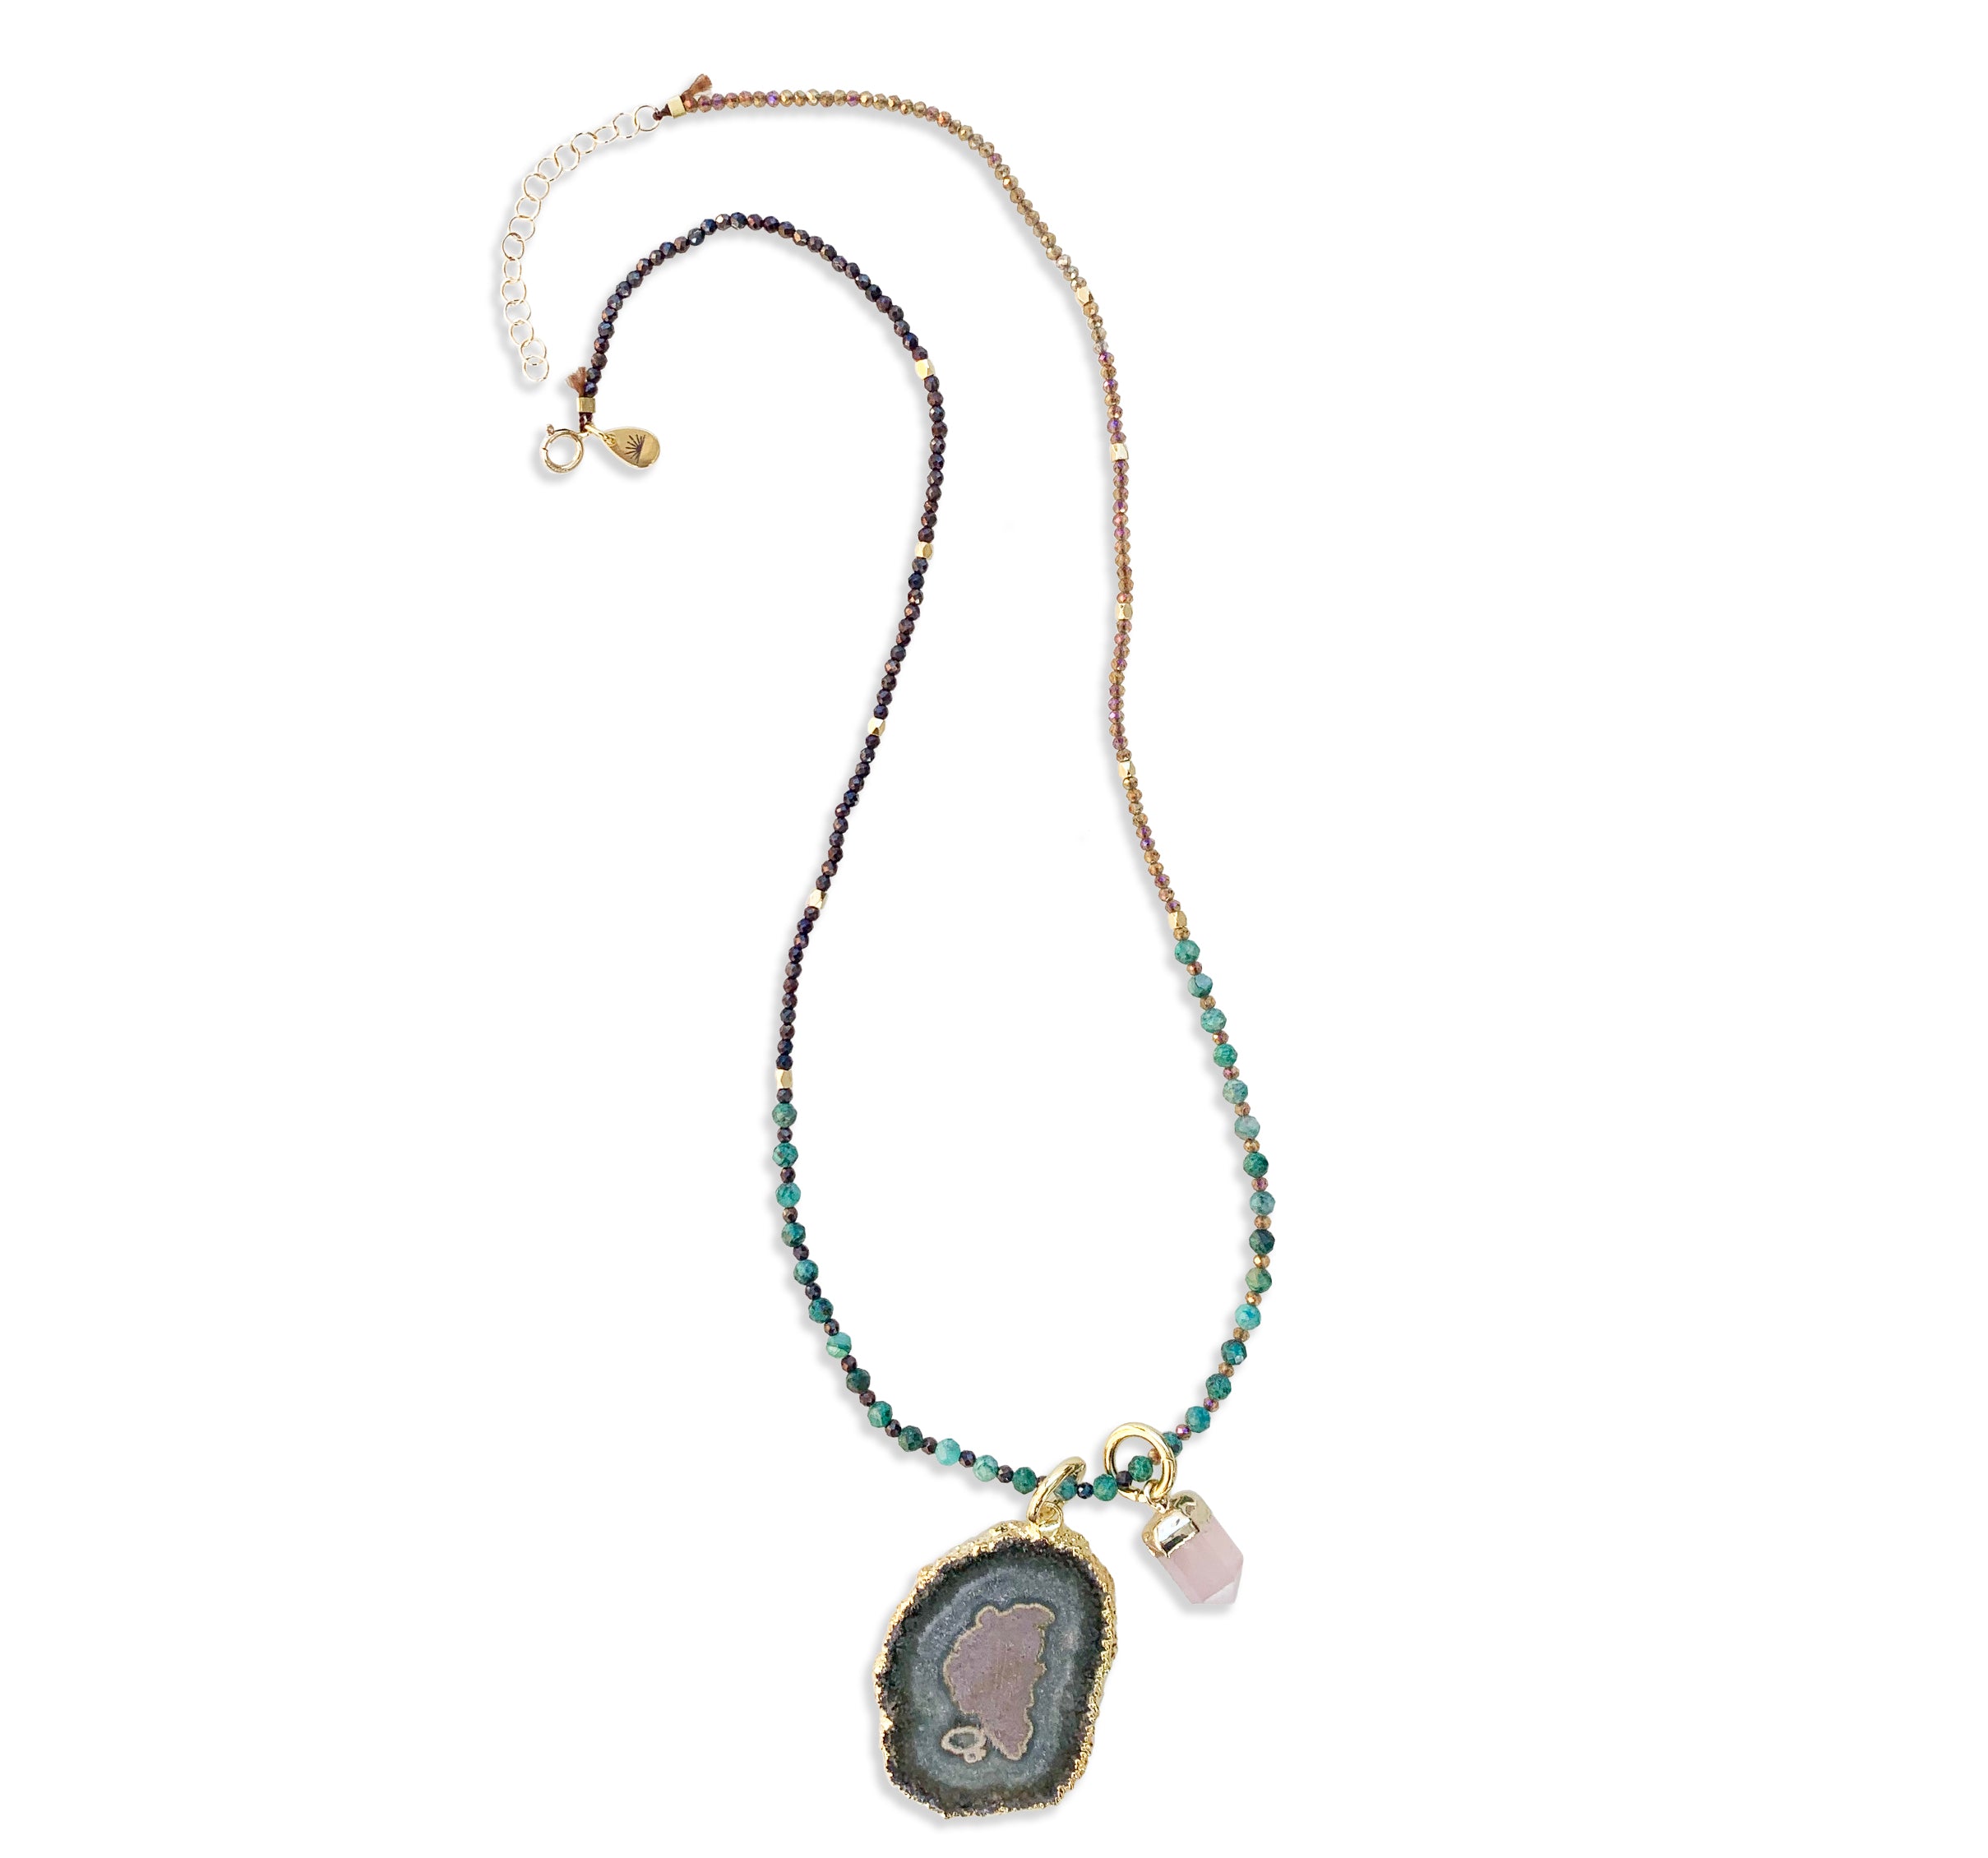 Cast-of-Stones-Chrysocolla-Gemstone-Necklace-with-Large-Stalactite-and-Rose-Quartz-Charms